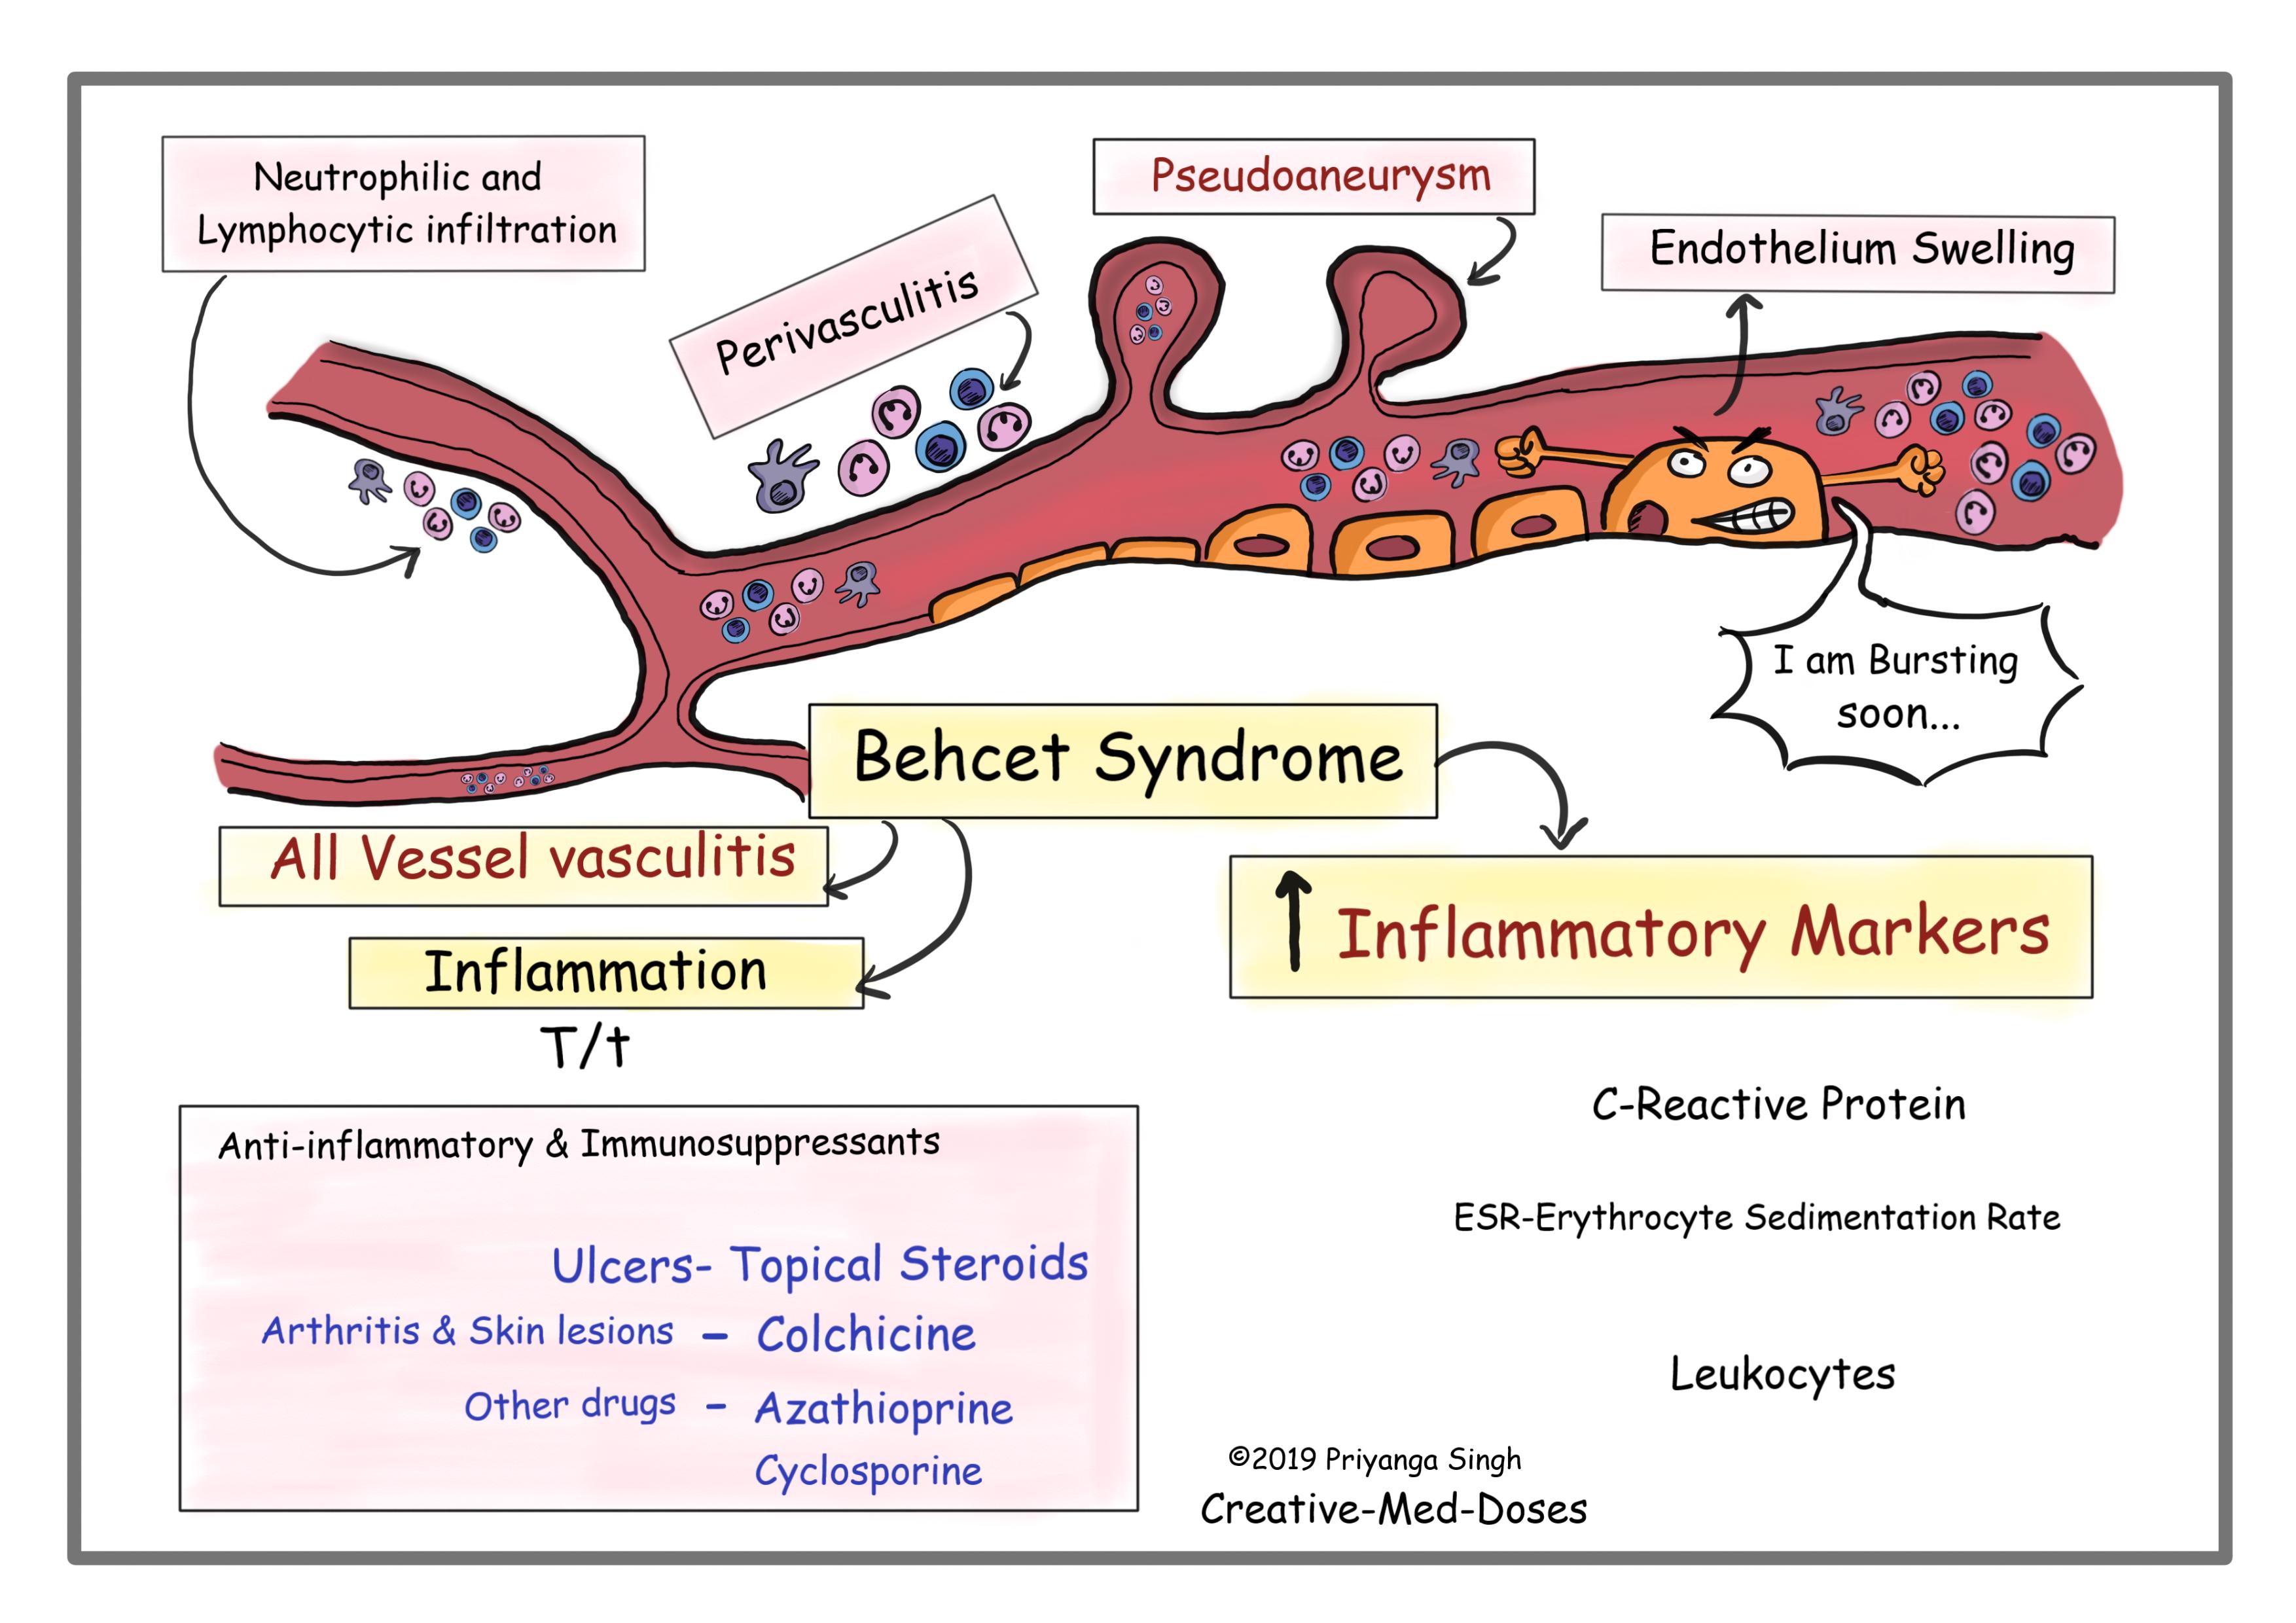 Behcet Syndrome is all vessel vasculitis, visual map for pathogenesis, treatment and laboratory markers